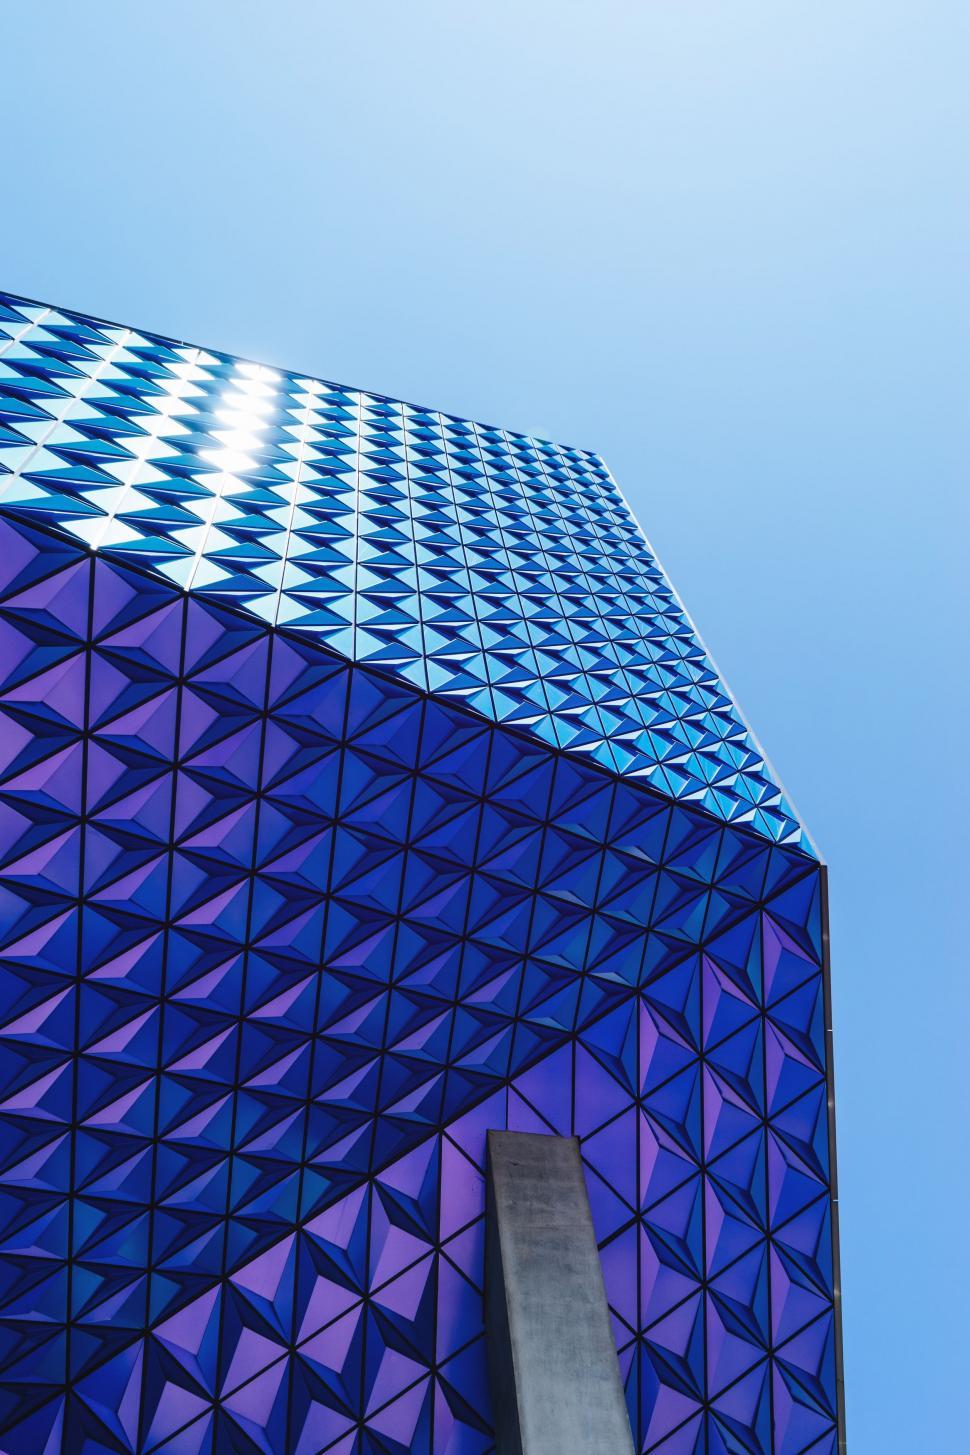 Free Image of Geometrical Patterns Building  